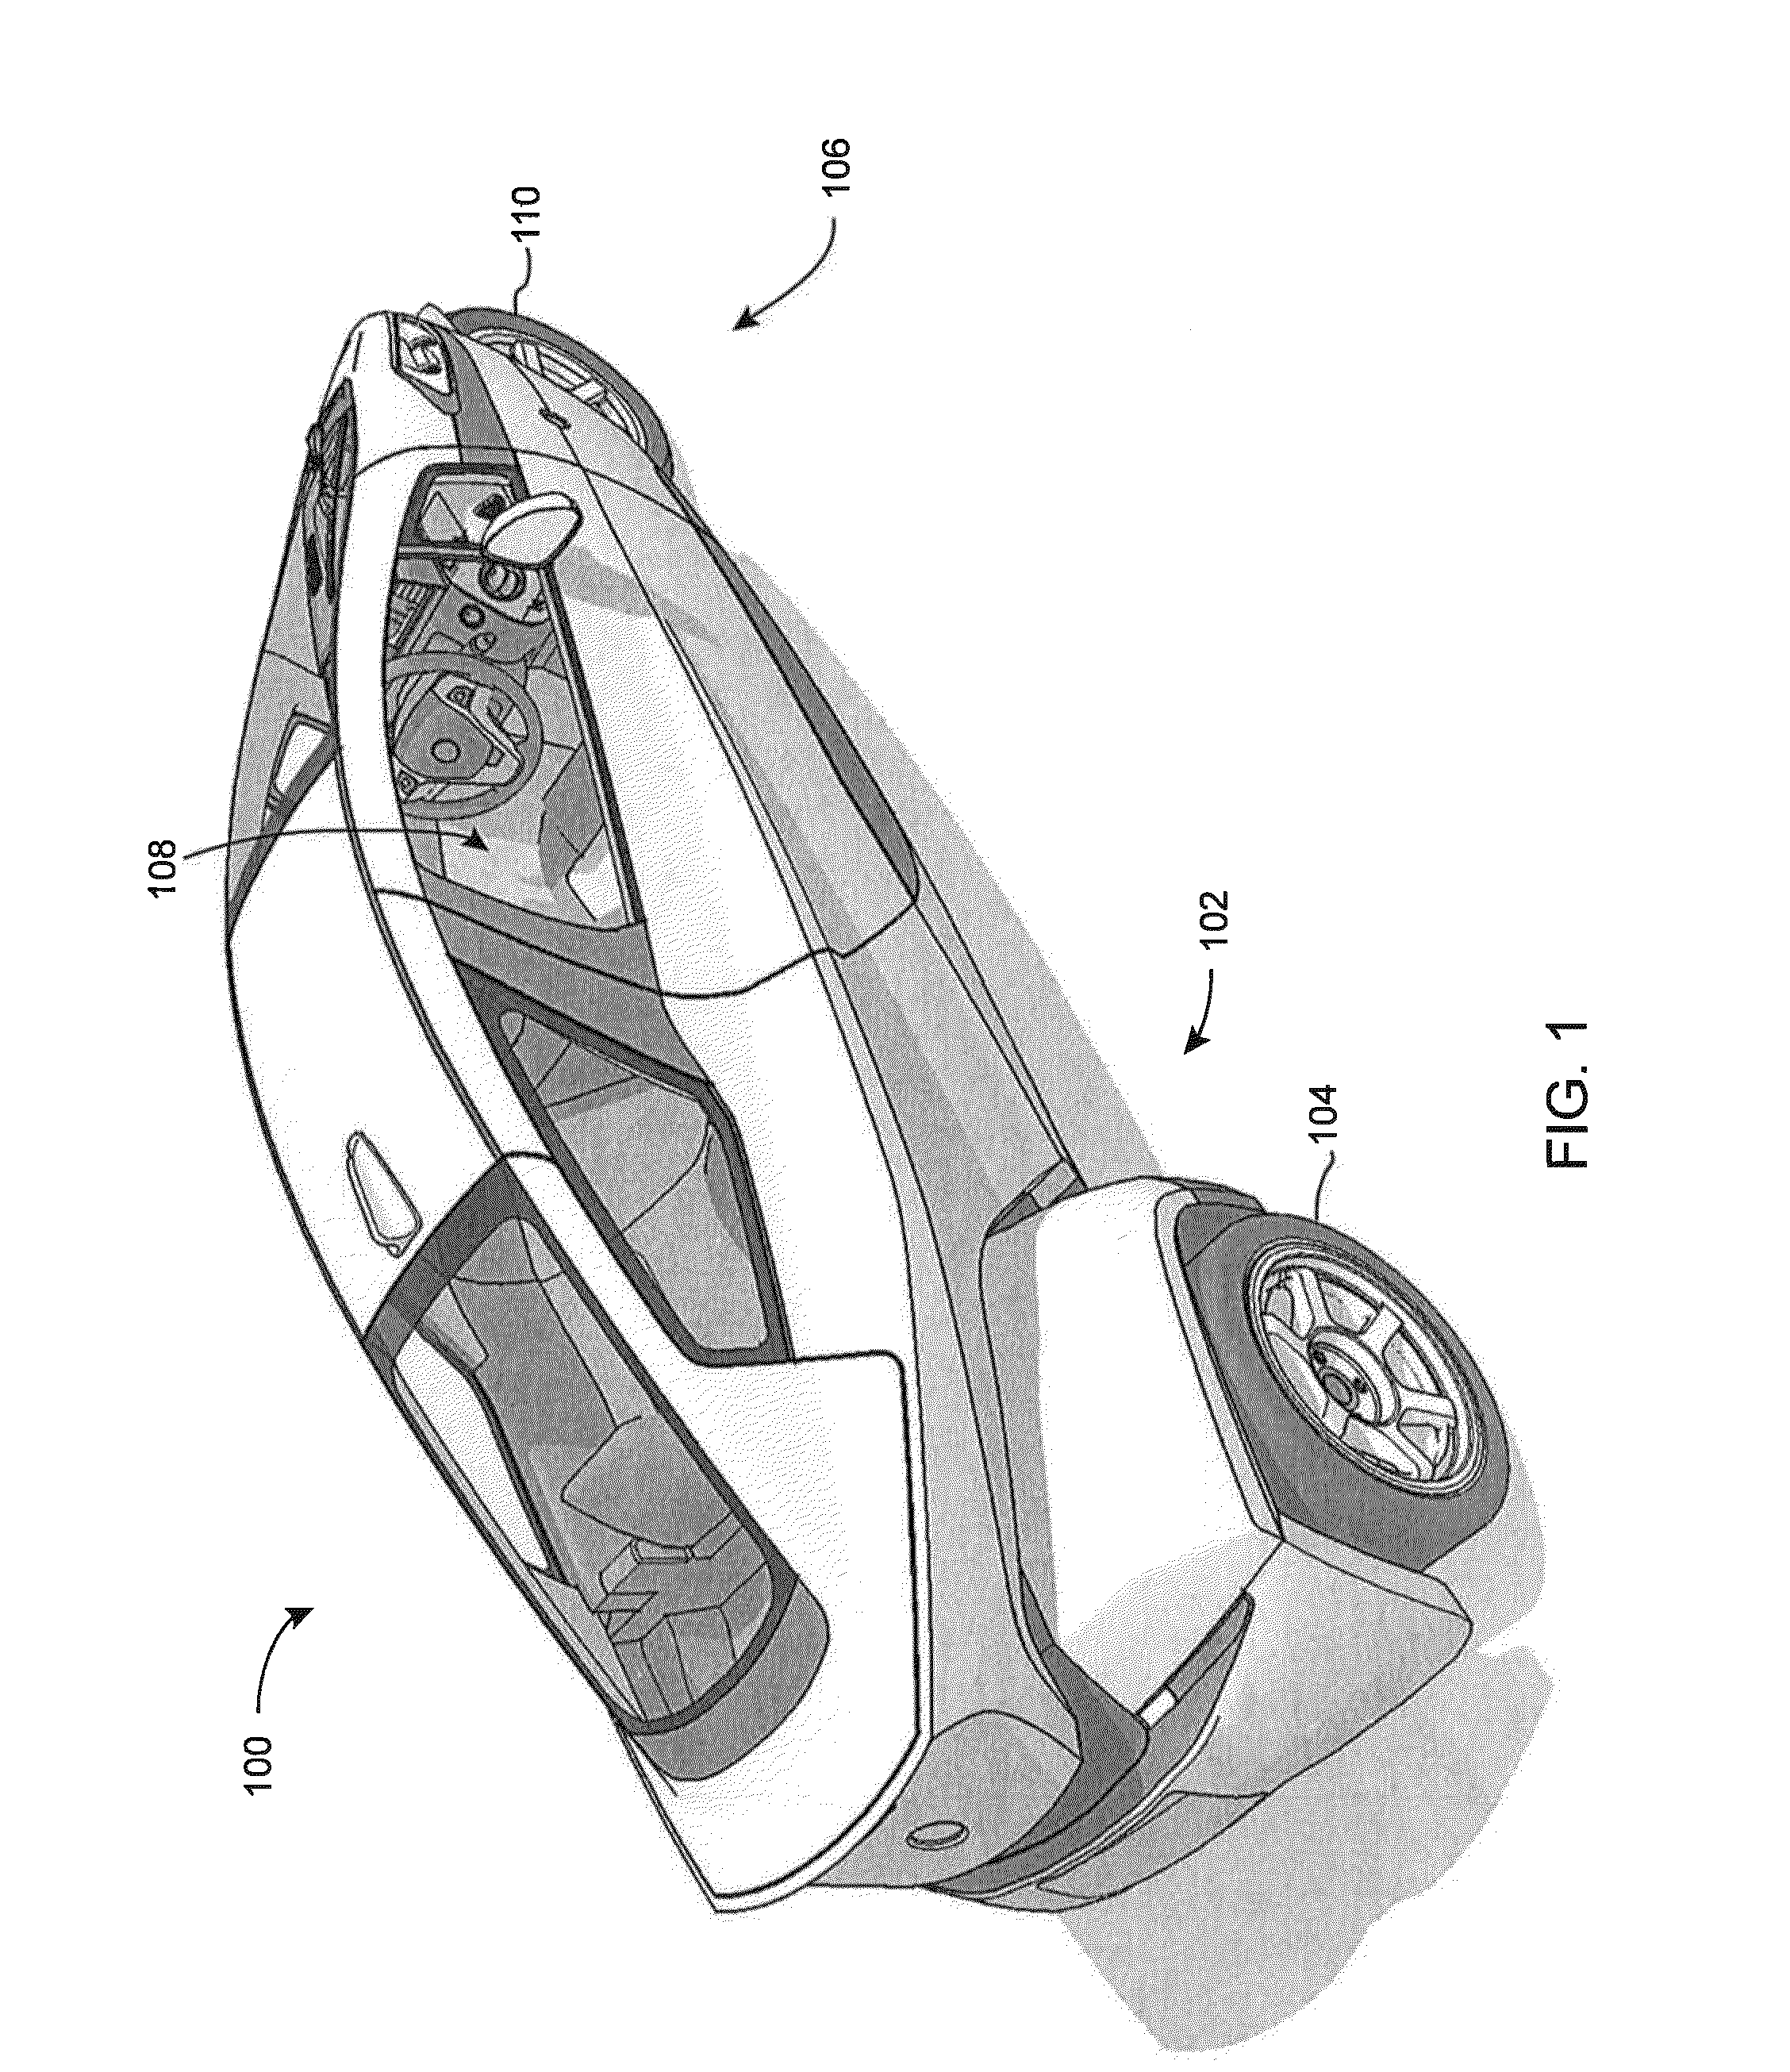 Steering and control systems for a three-wheeled vehicle